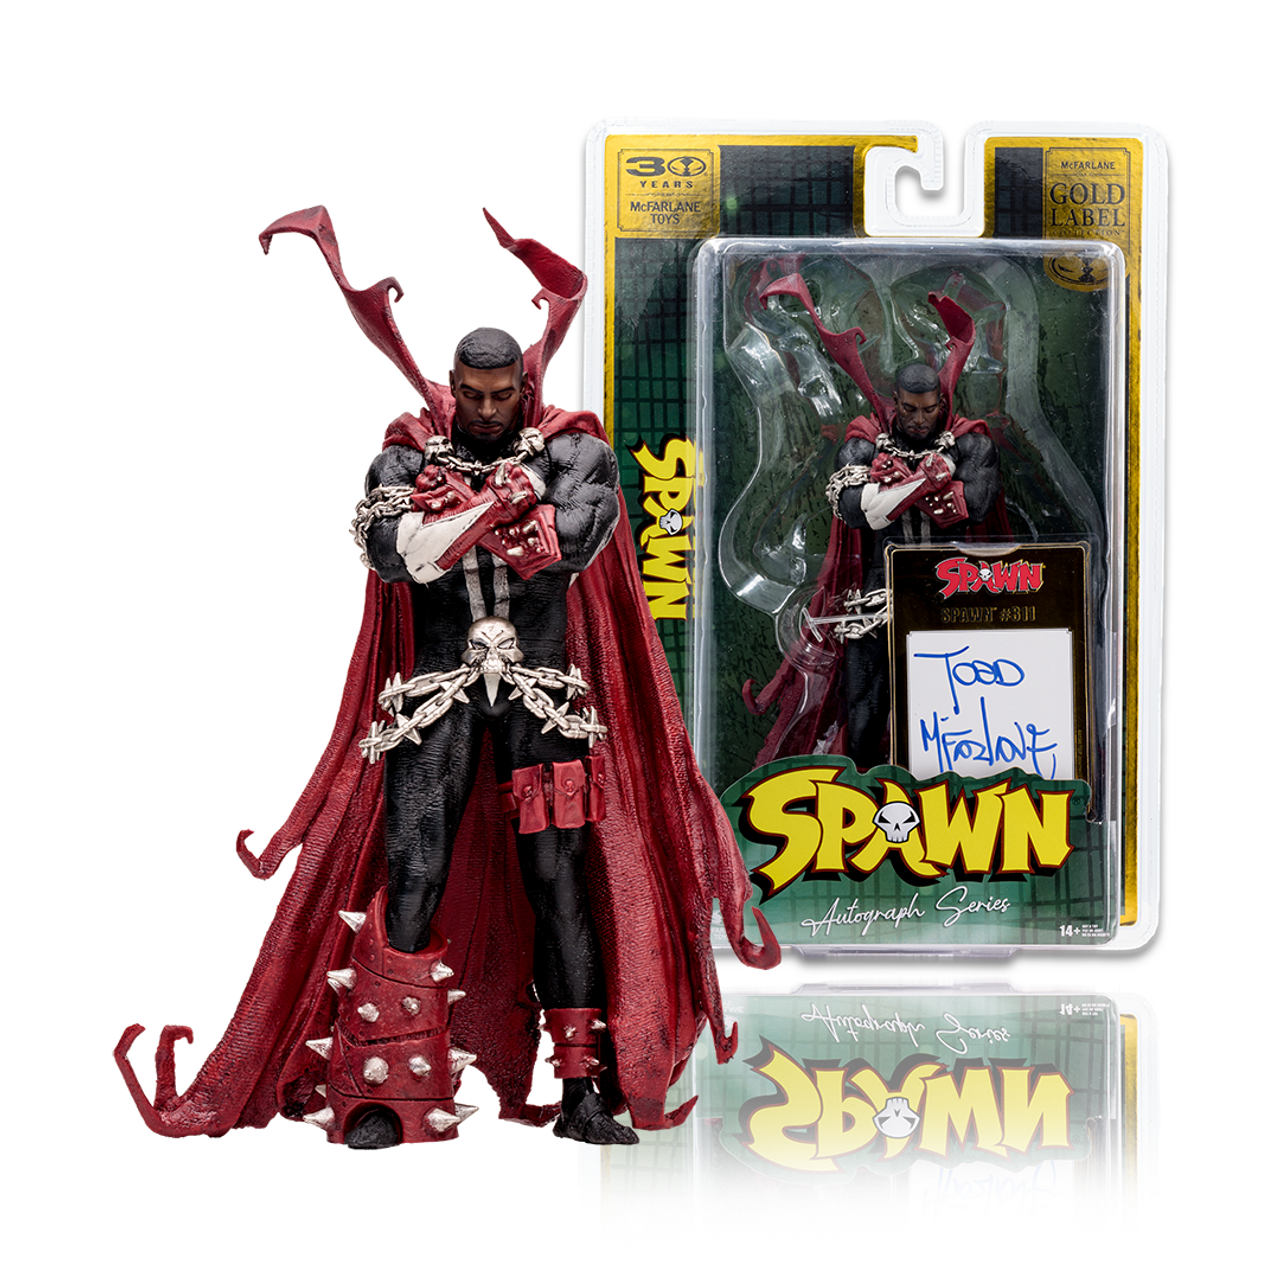 Spawn #311 (Spawn) Todd McFarlane Autographed Series GOLD LABEL 7